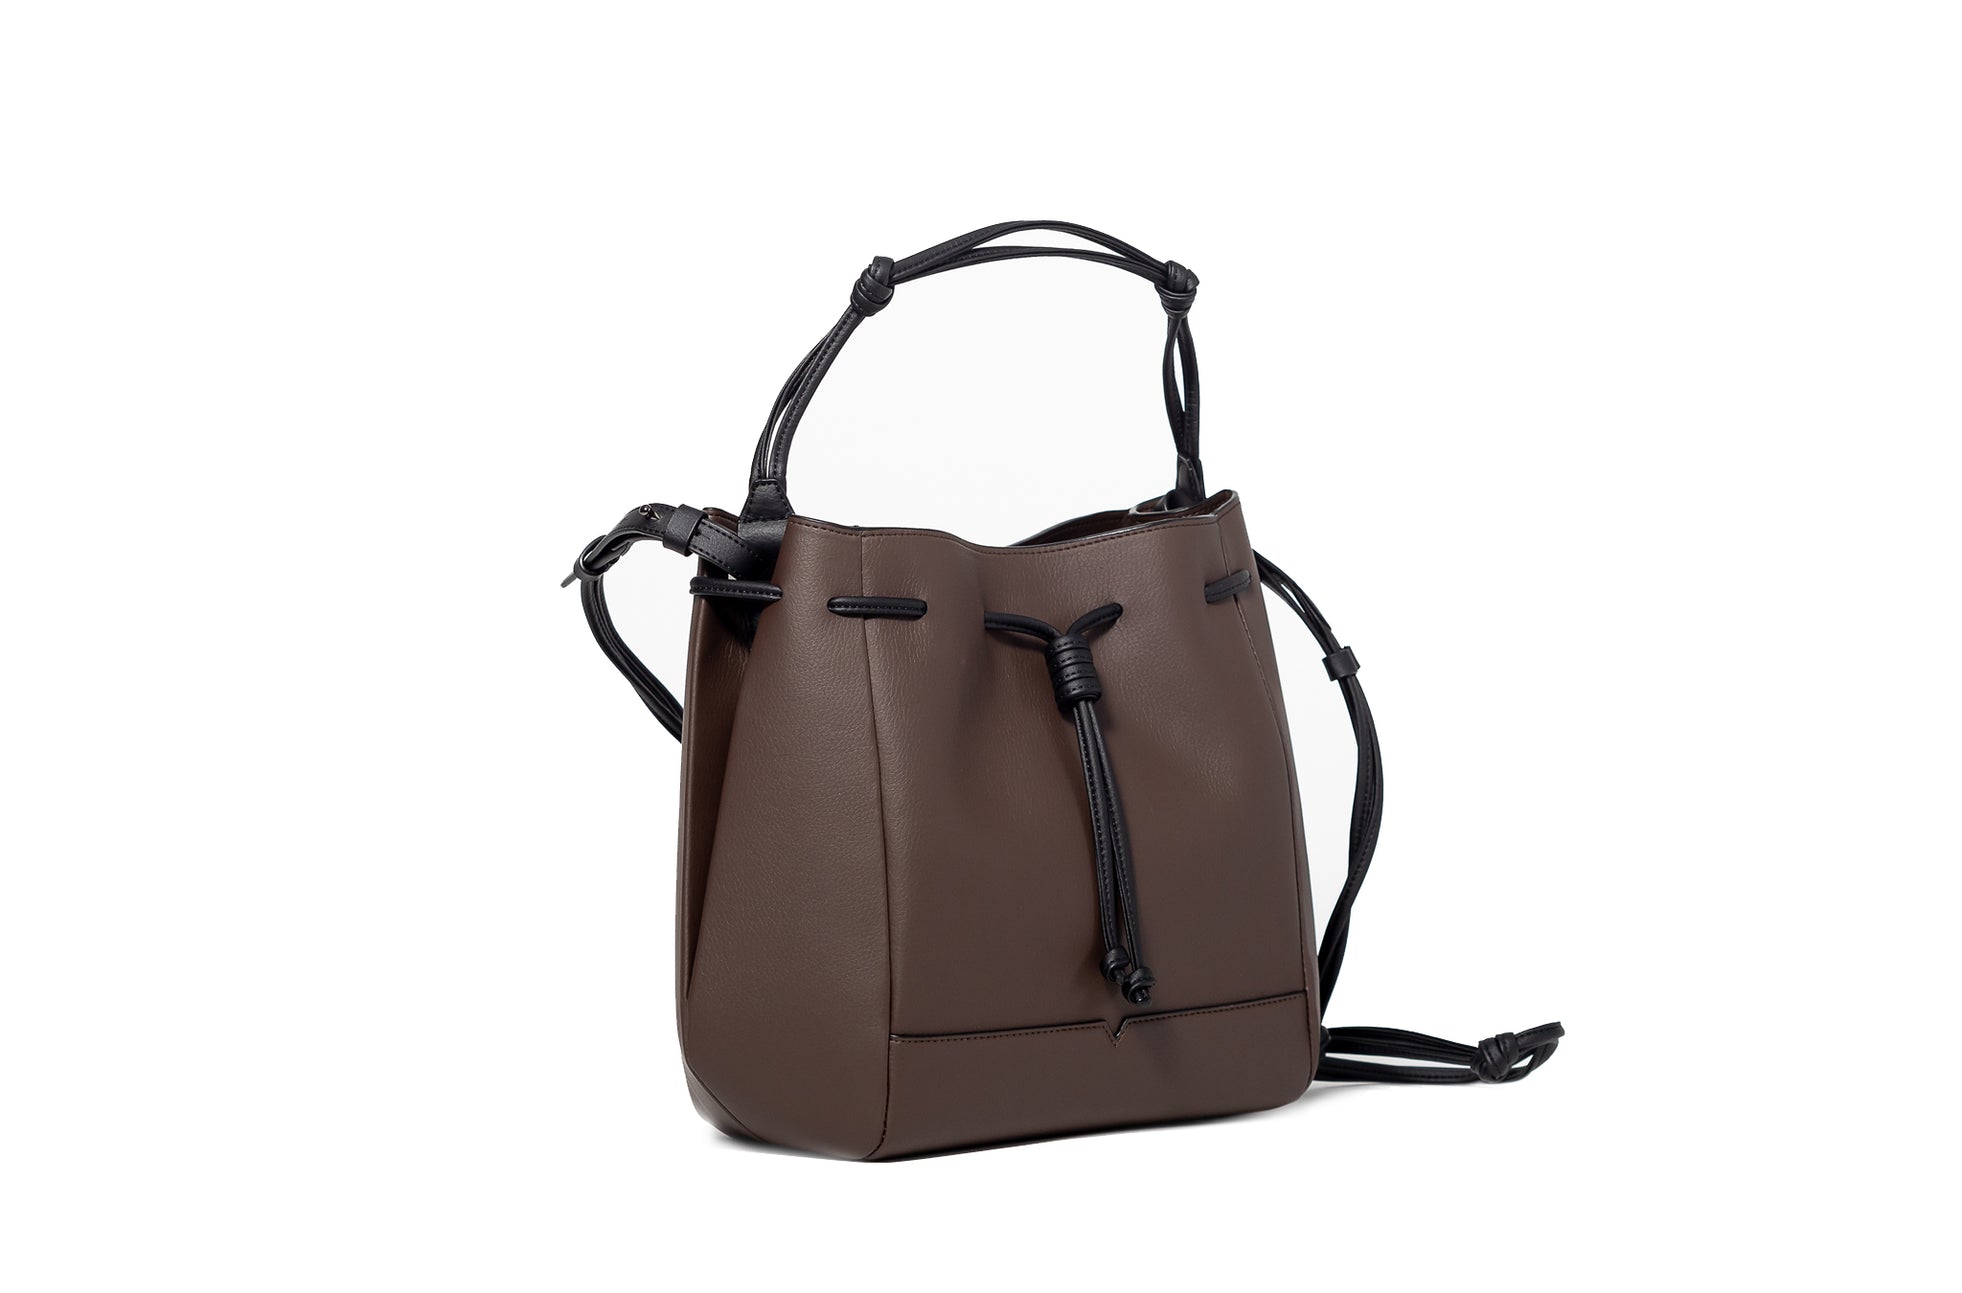 The Bucket Crossbody in Technik-Leather in Taupe & Black  image 2